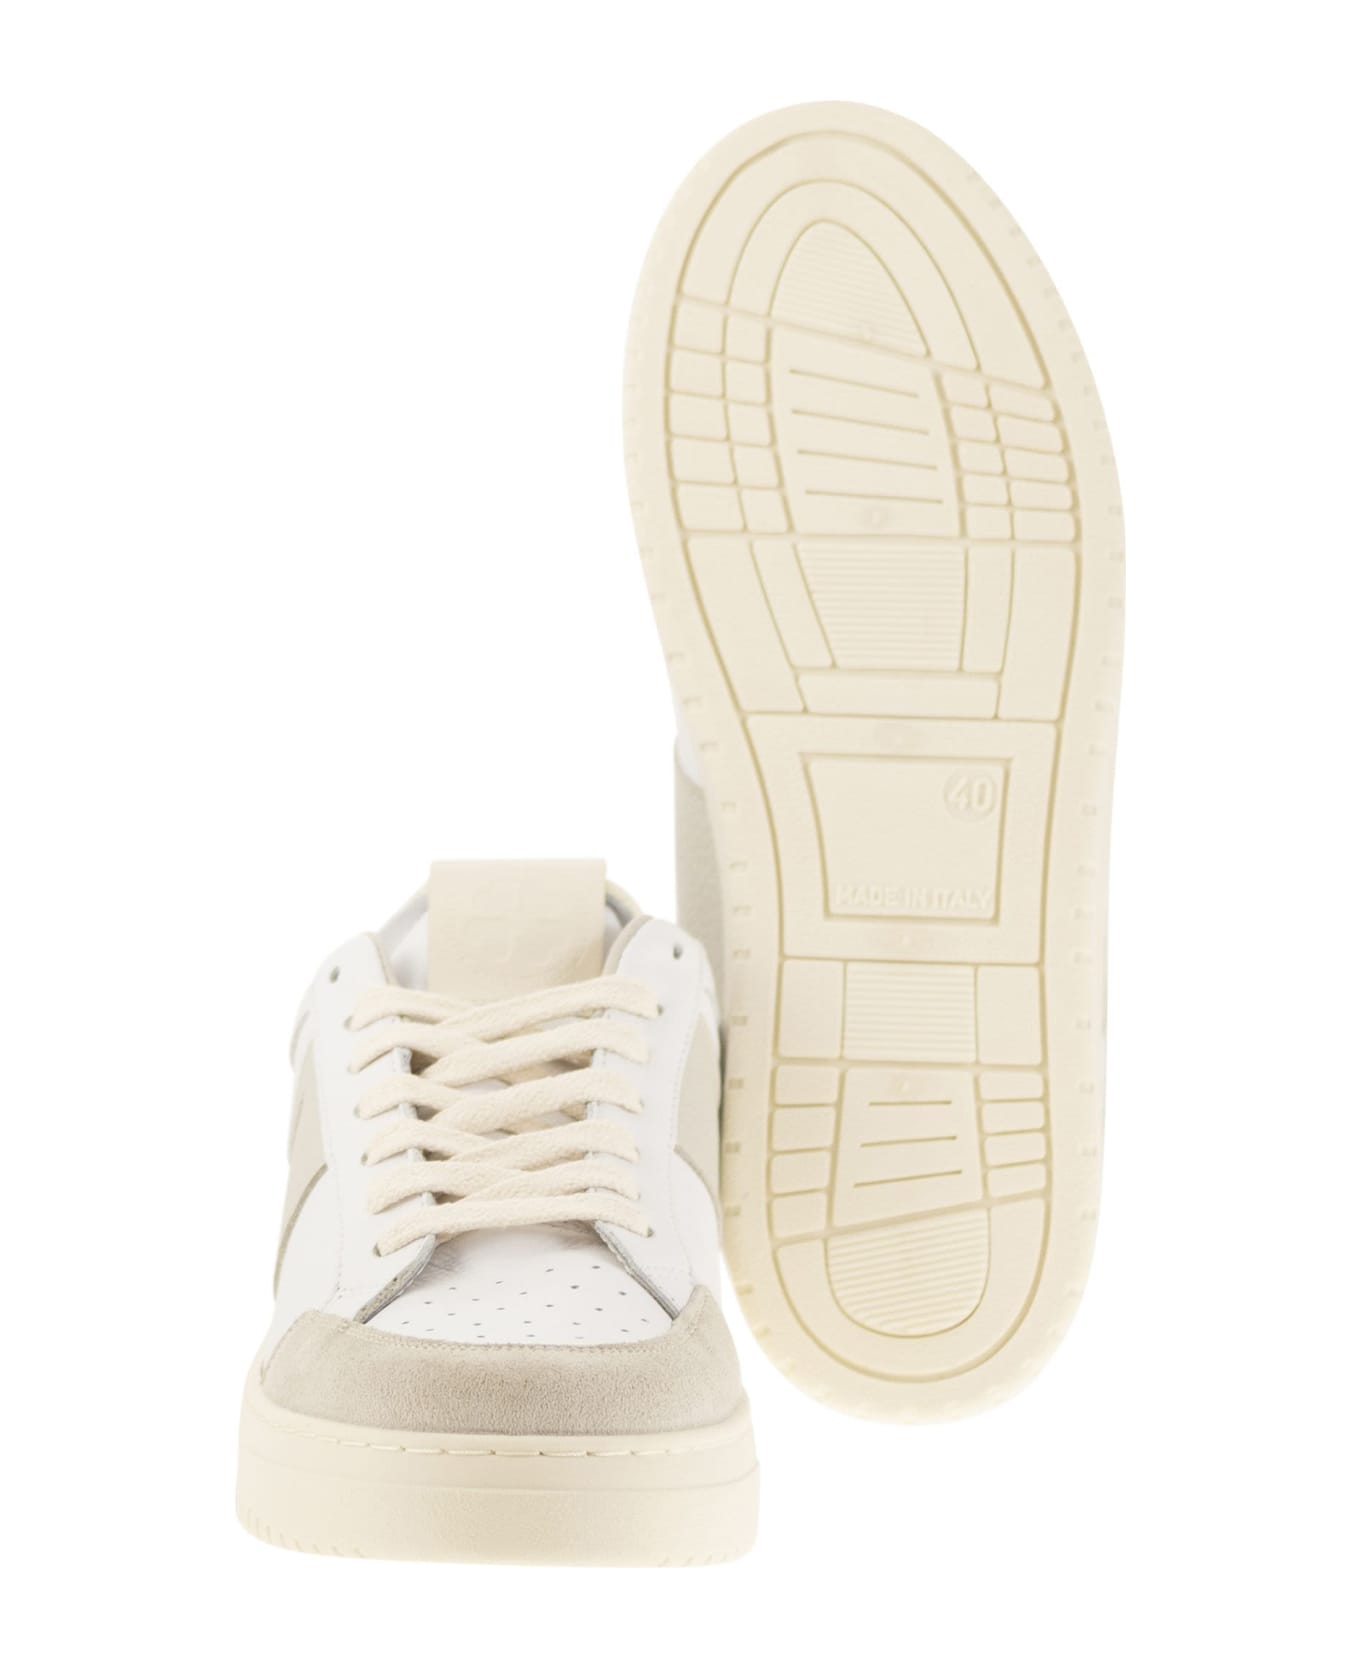 Saint Sneakers Sail - Leather And Suede Trainers - White/marble スニーカー